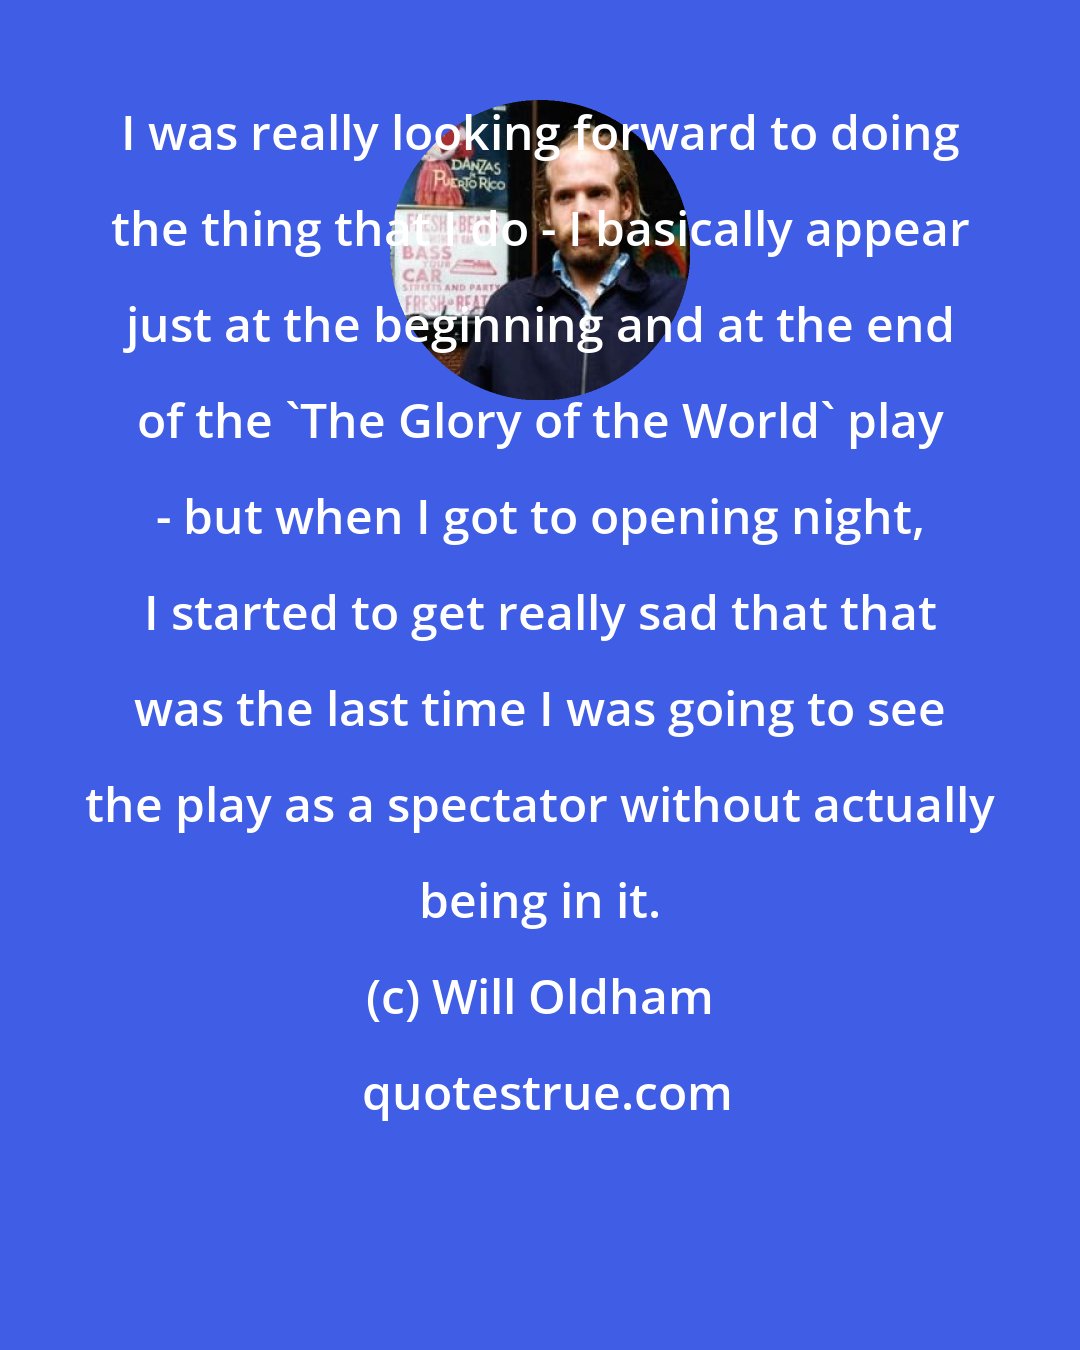 Will Oldham: I was really looking forward to doing the thing that I do - I basically appear just at the beginning and at the end of the 'The Glory of the World' play - but when I got to opening night, I started to get really sad that that was the last time I was going to see the play as a spectator without actually being in it.